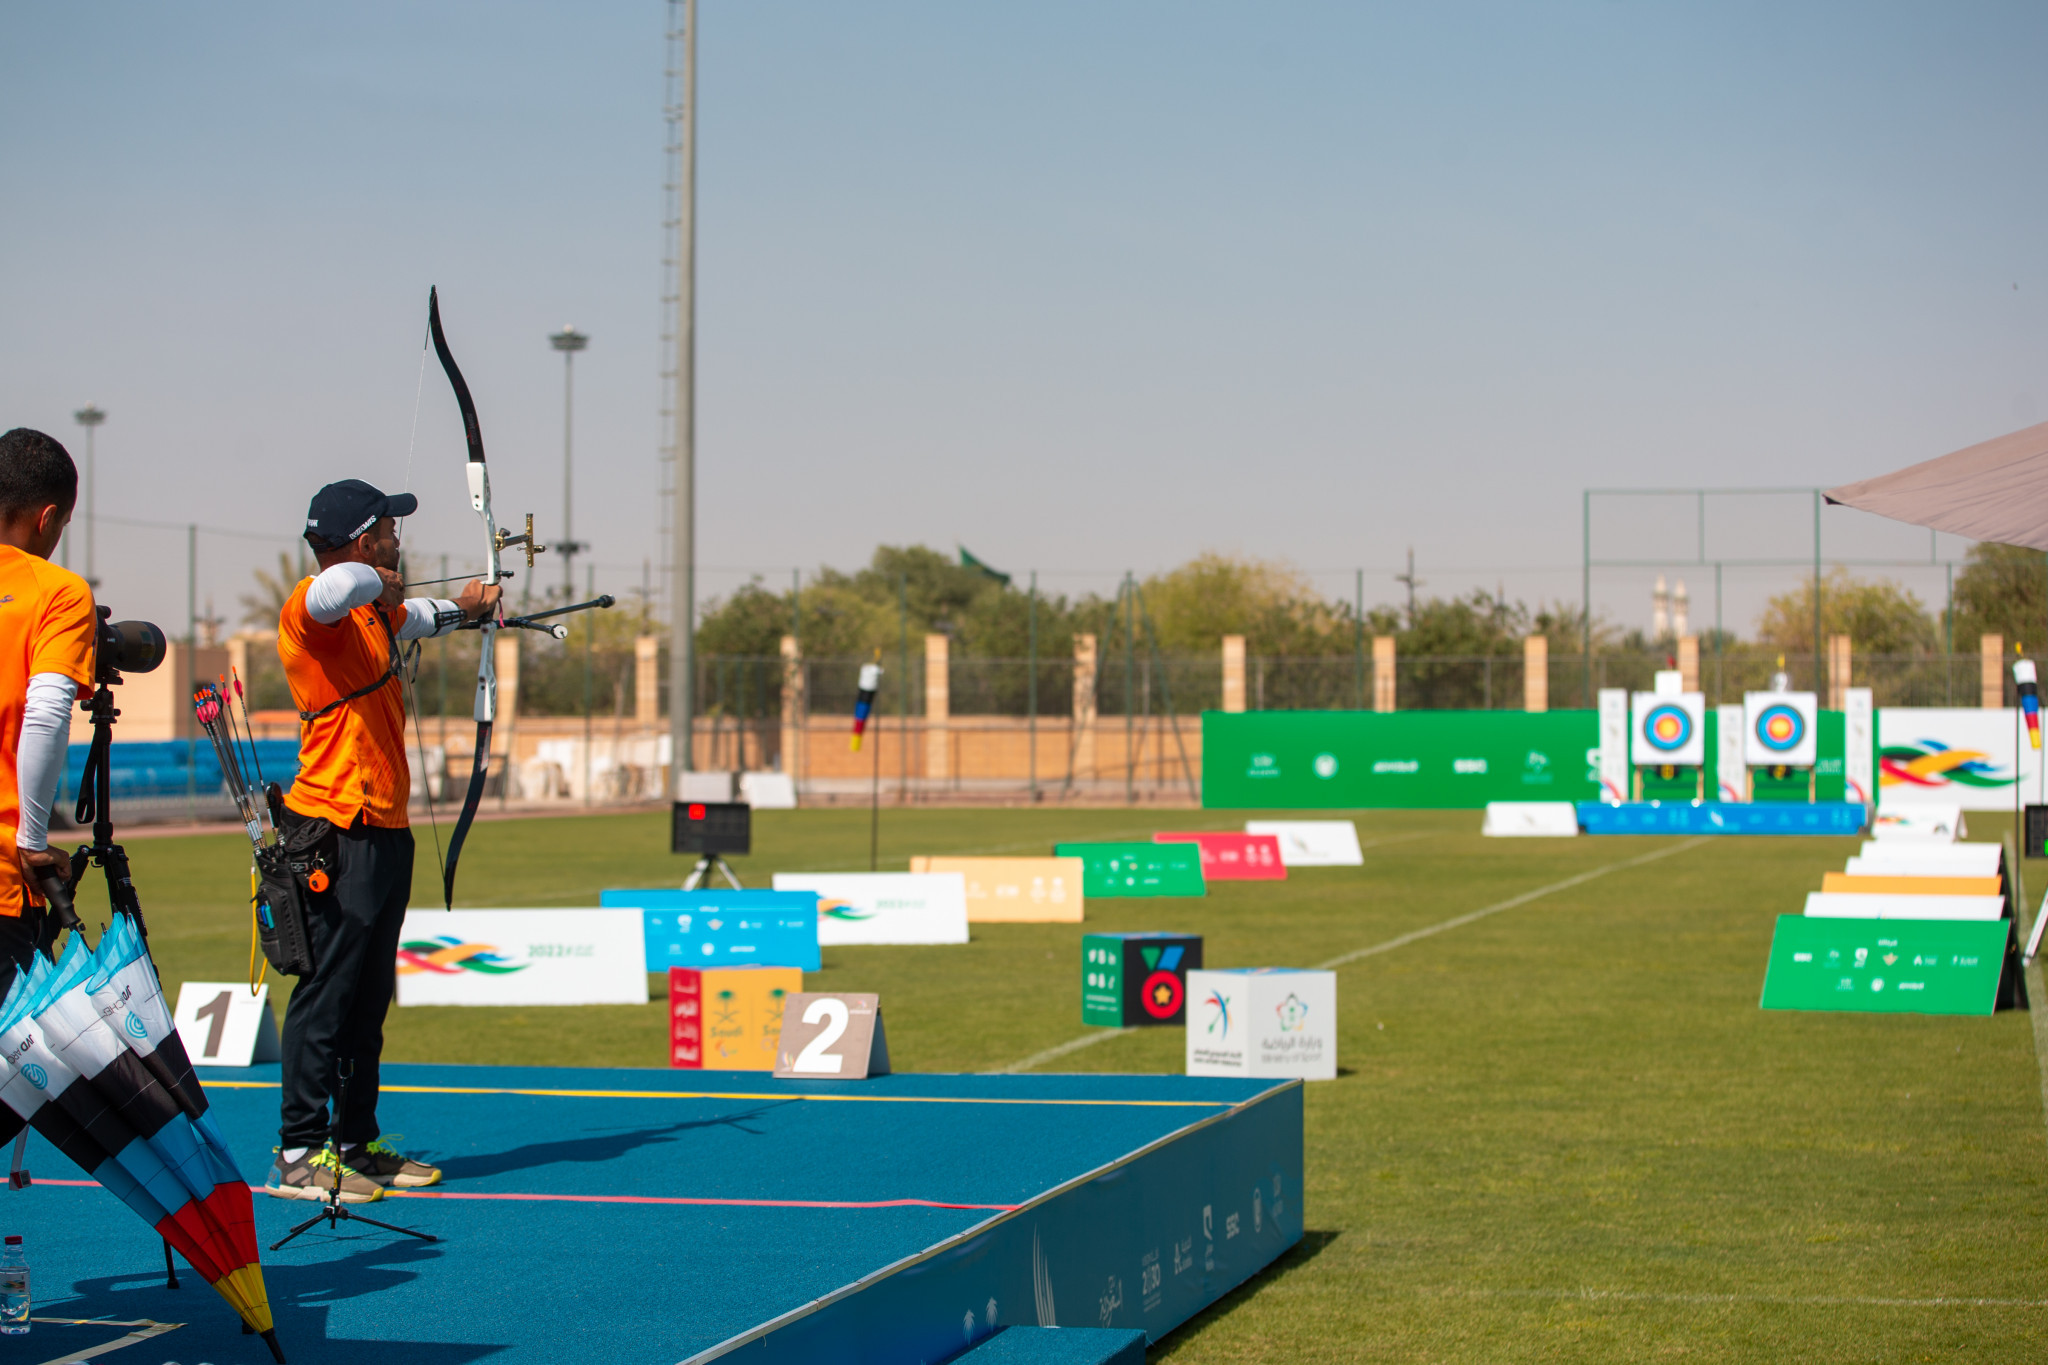 Two recurve finals and one compound title were fought at the Prince Faisal bin Fahd Stadium ©Saudi Games